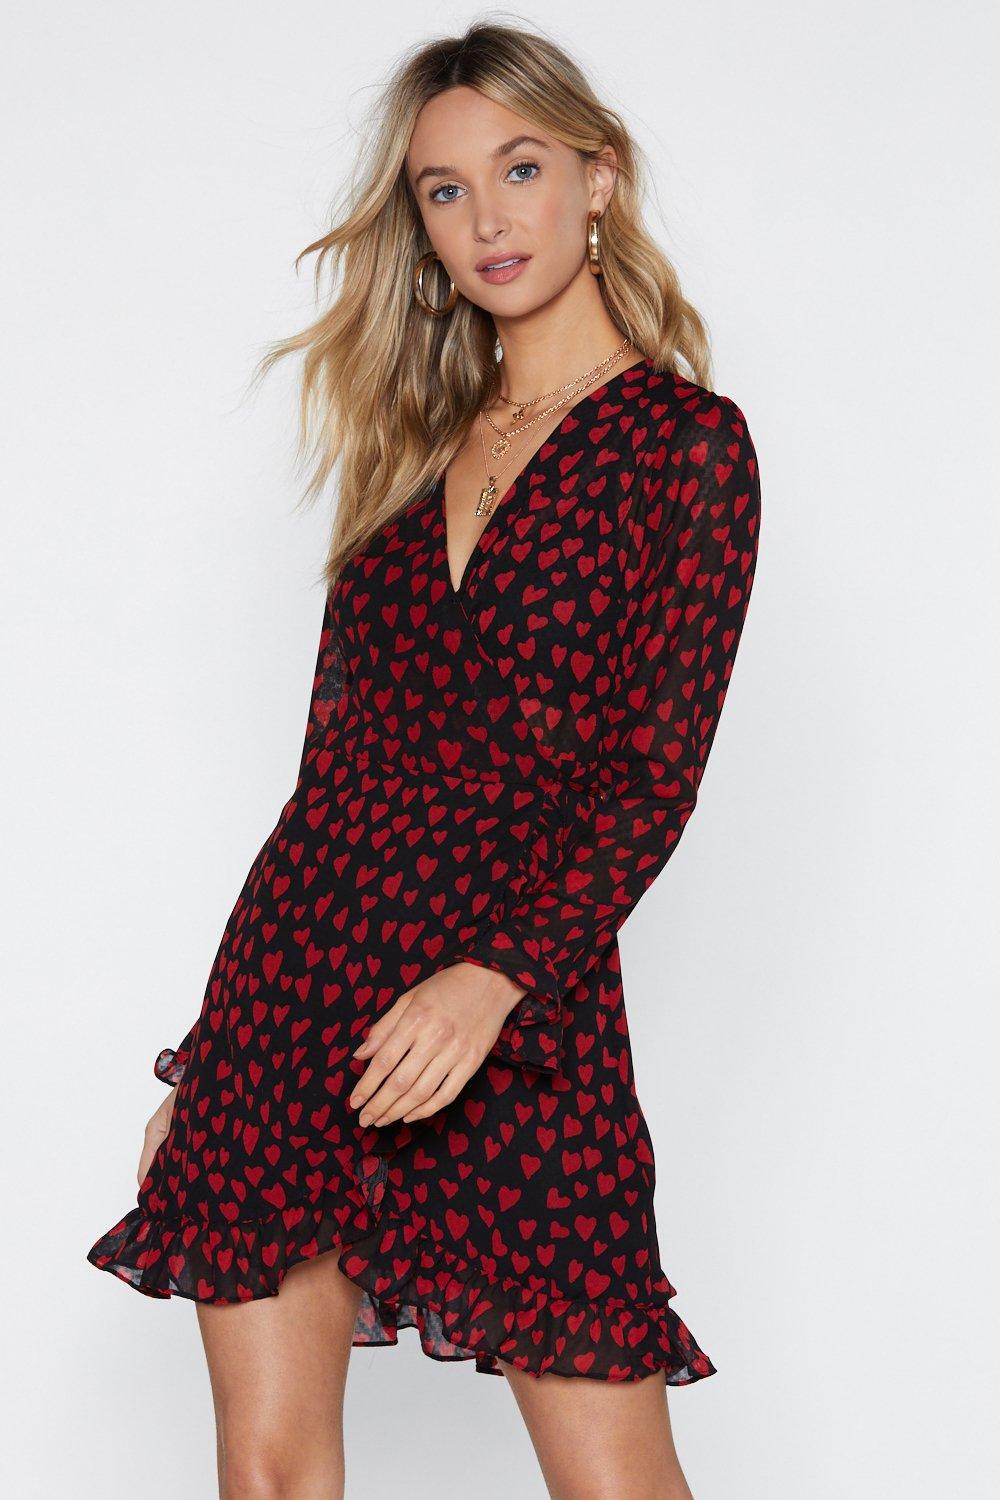 A Good Place to Heart Wrap Dress | Nasty Gal